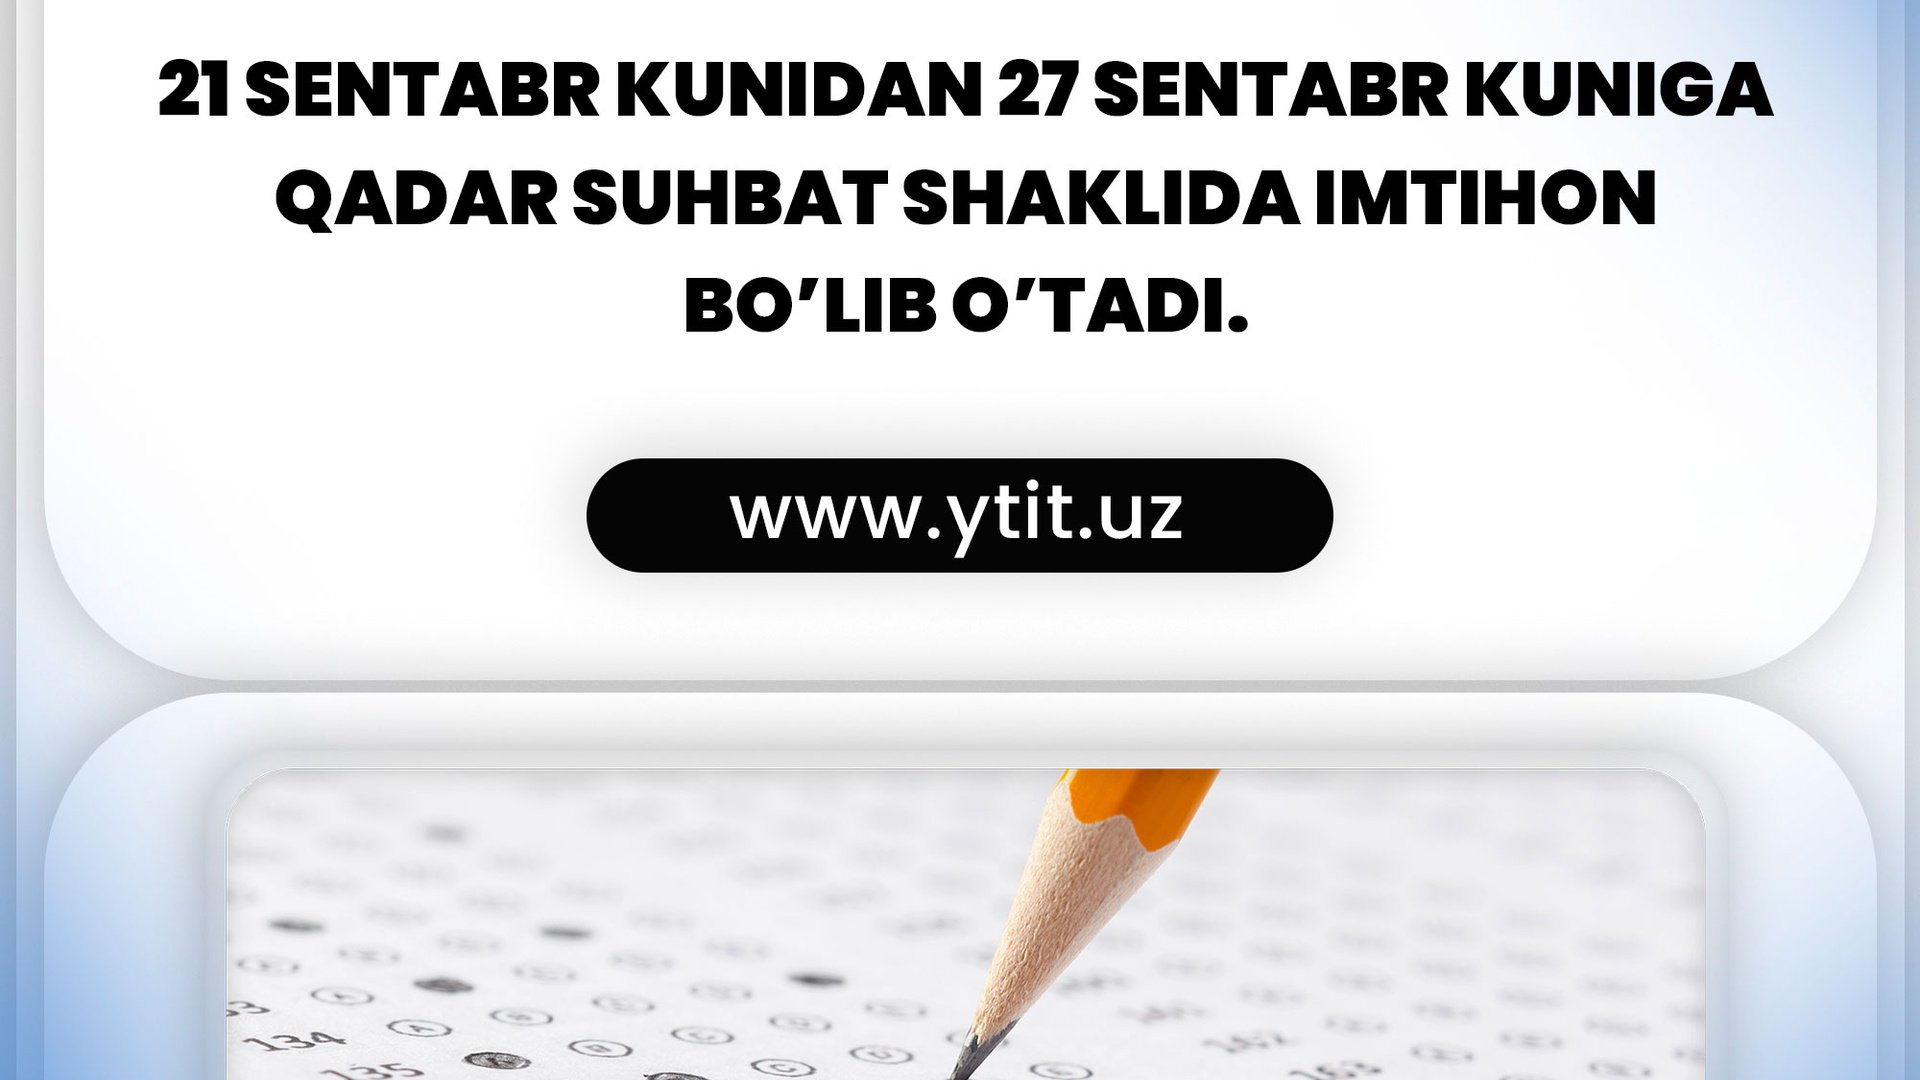 TO THE ATTENTION OF APPLICANTS WHO APPLIED TO THE BRANCH OF THE YEOJU TECHNICAL INSTITUTE IN SAMARKAND!